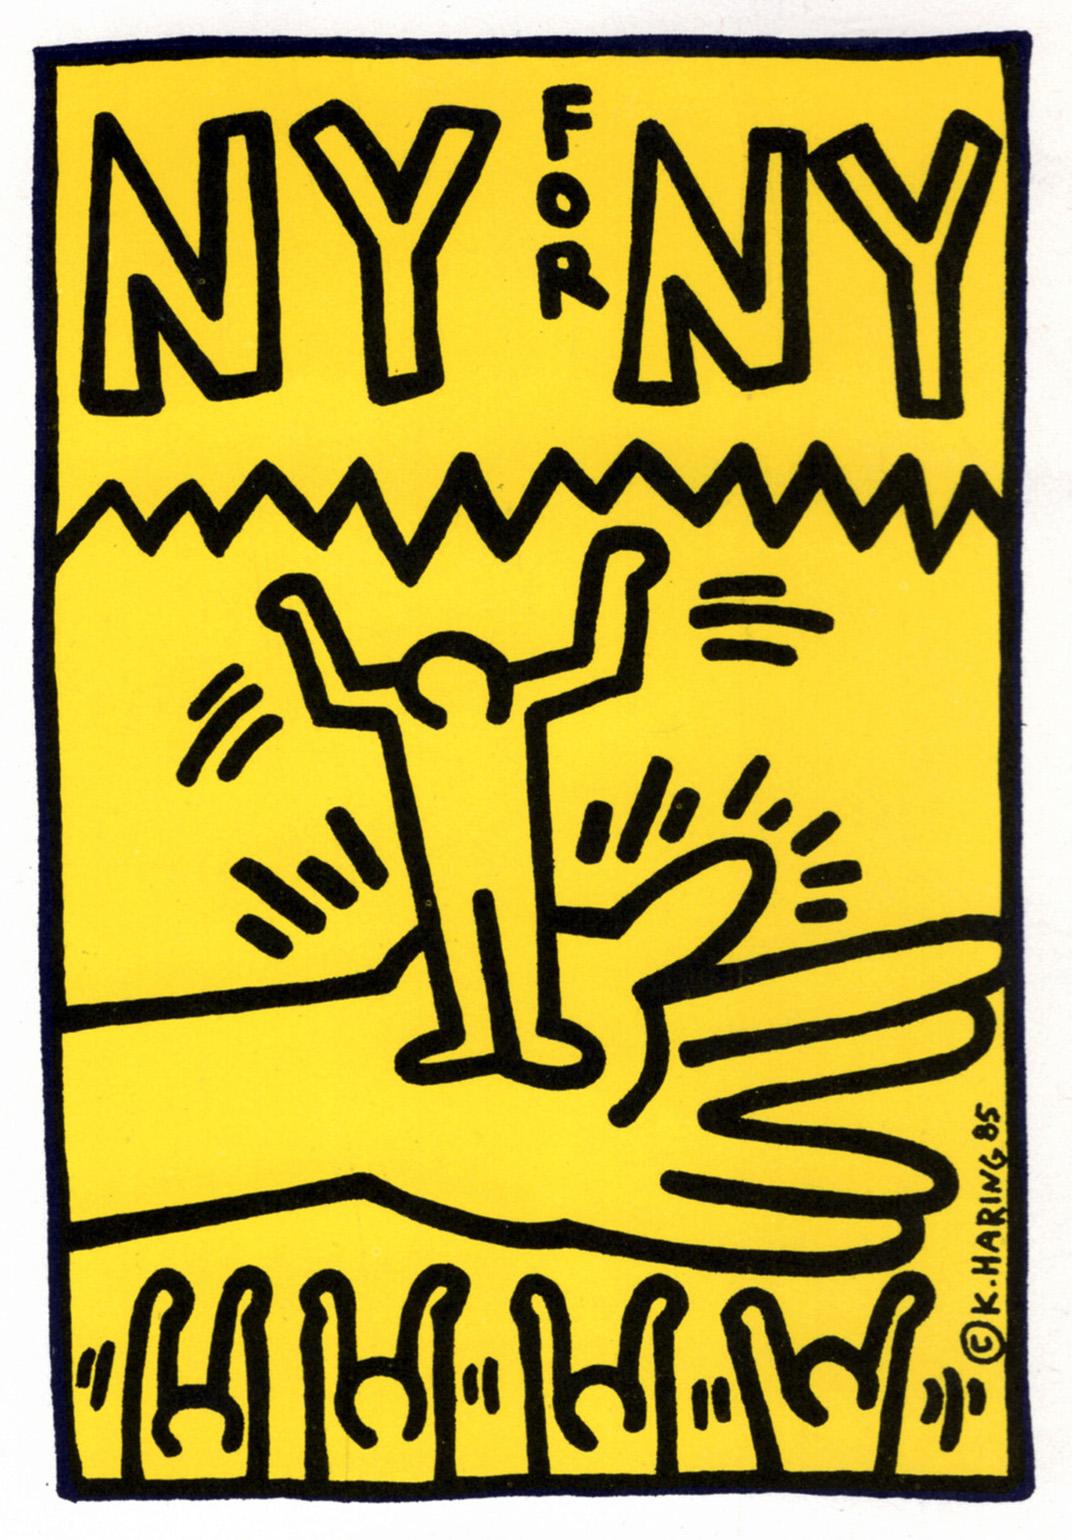 Keith Haring Help the Homeless 1985 (Keith Haring 1985 announcement)